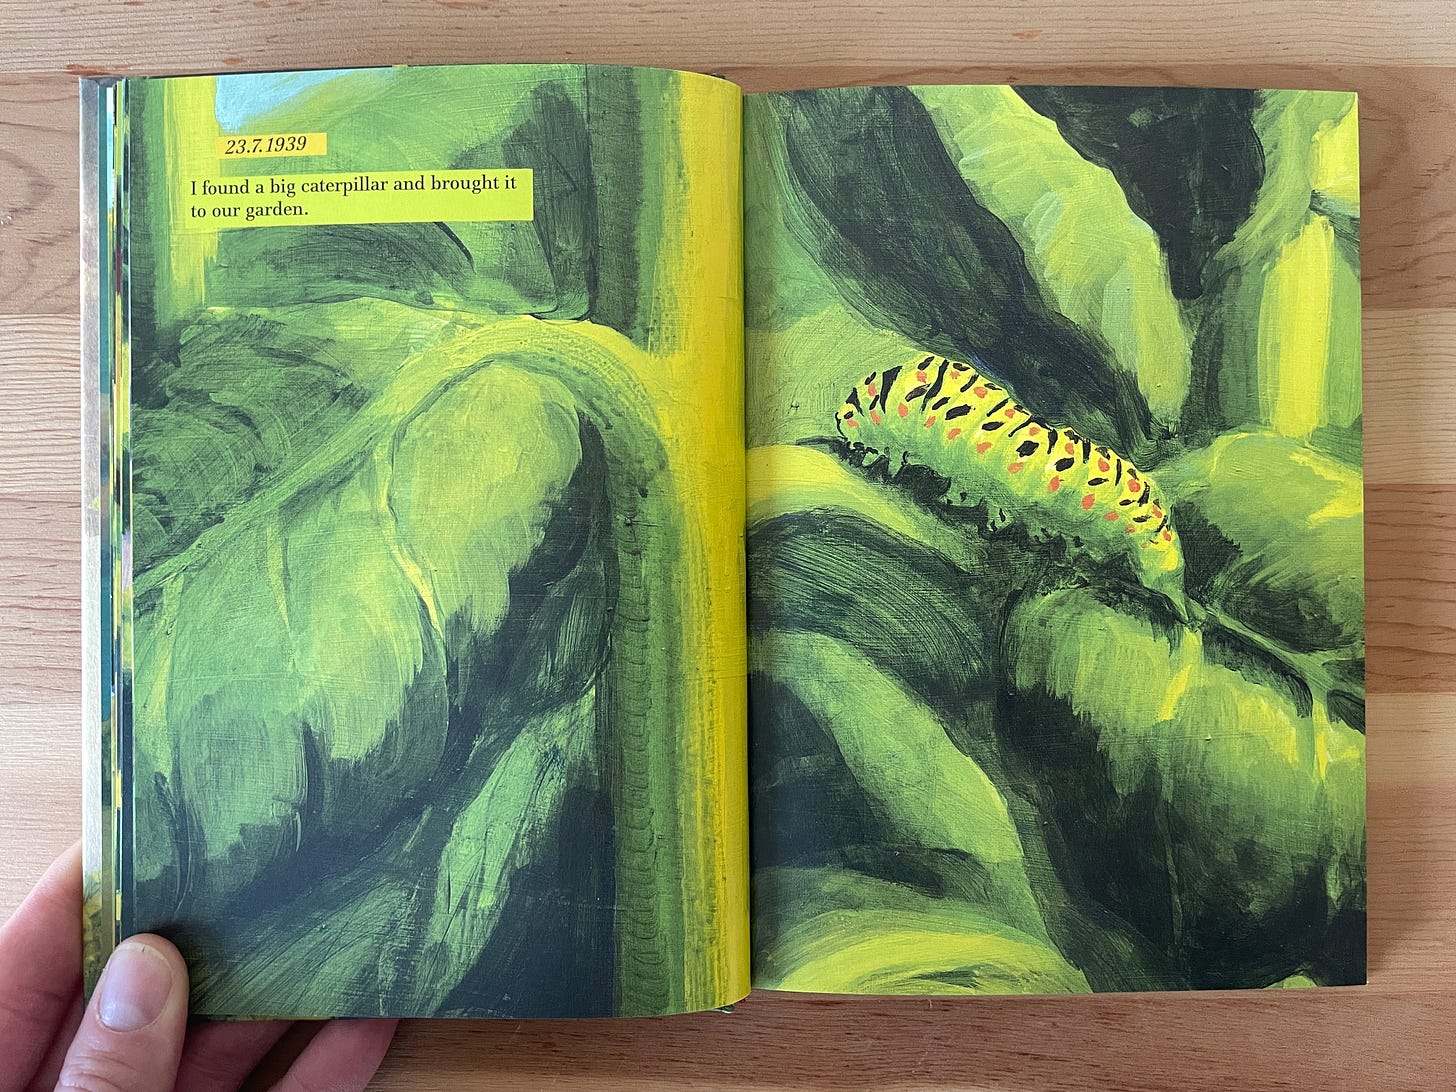 A book laid open to a painting of a caterpillar crawling up a leafy plant. Text on the page is in the caption.